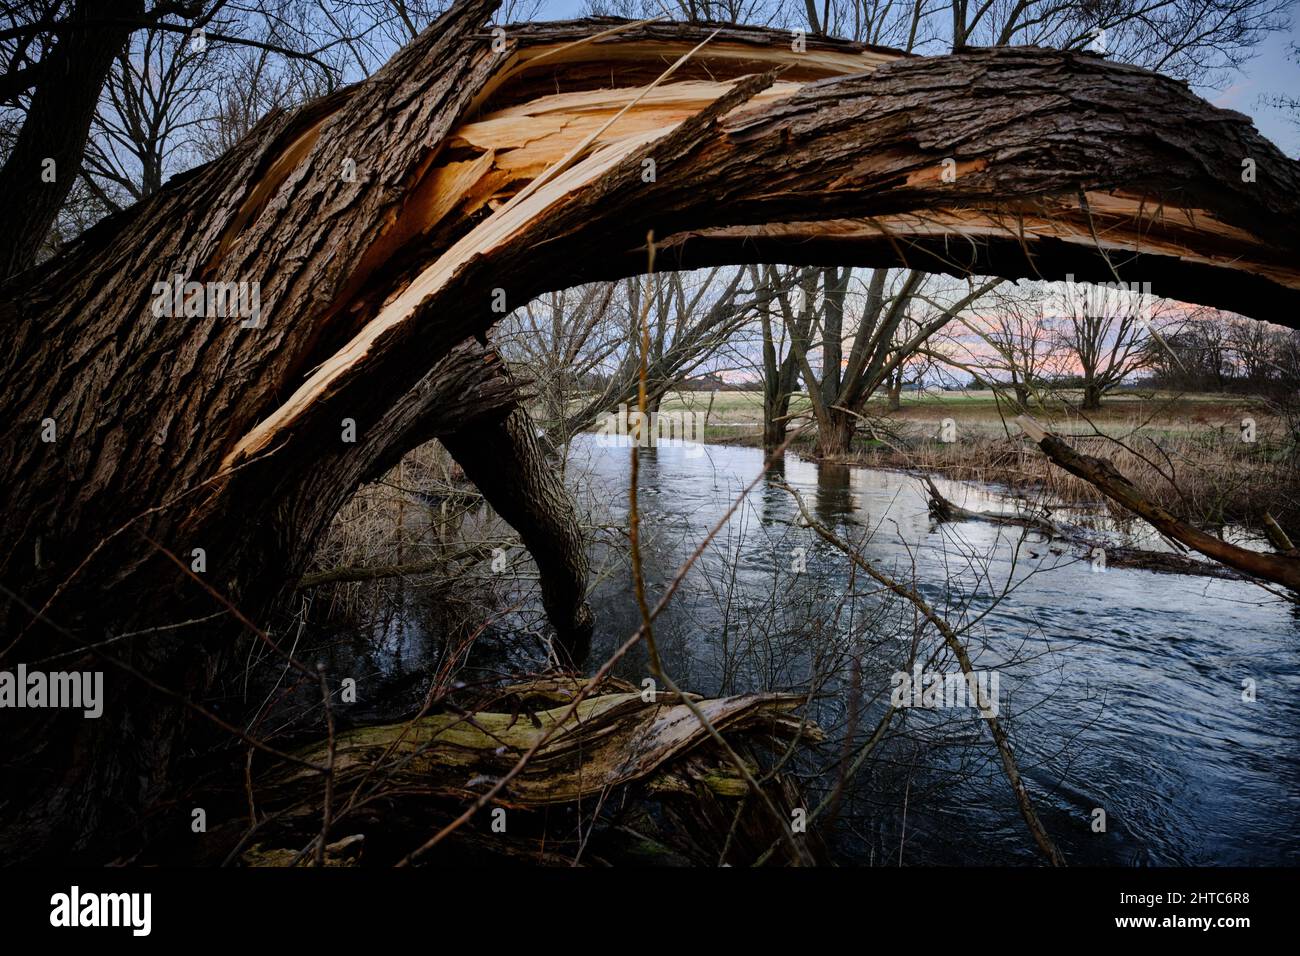 24 February 2022, Lower Saxony, Brunswick: A tree bent by the storms of the last few days stands in the northern Oker floodplain on the banks of the river Oker, which floods after heavy rainfall. This Monday, the Intergovernmental Panel on Climate Change will report on the drastic consequences of man-made climate change for humans and nature. The world is in the crucial decade to still turn the tide and avert the worst consequences, said the co-chair of the responsible working group of the Intergovernmental Panel on Climate Change (IPCC), marine biologist Pörtner, before the publication. (to d Stock Photo